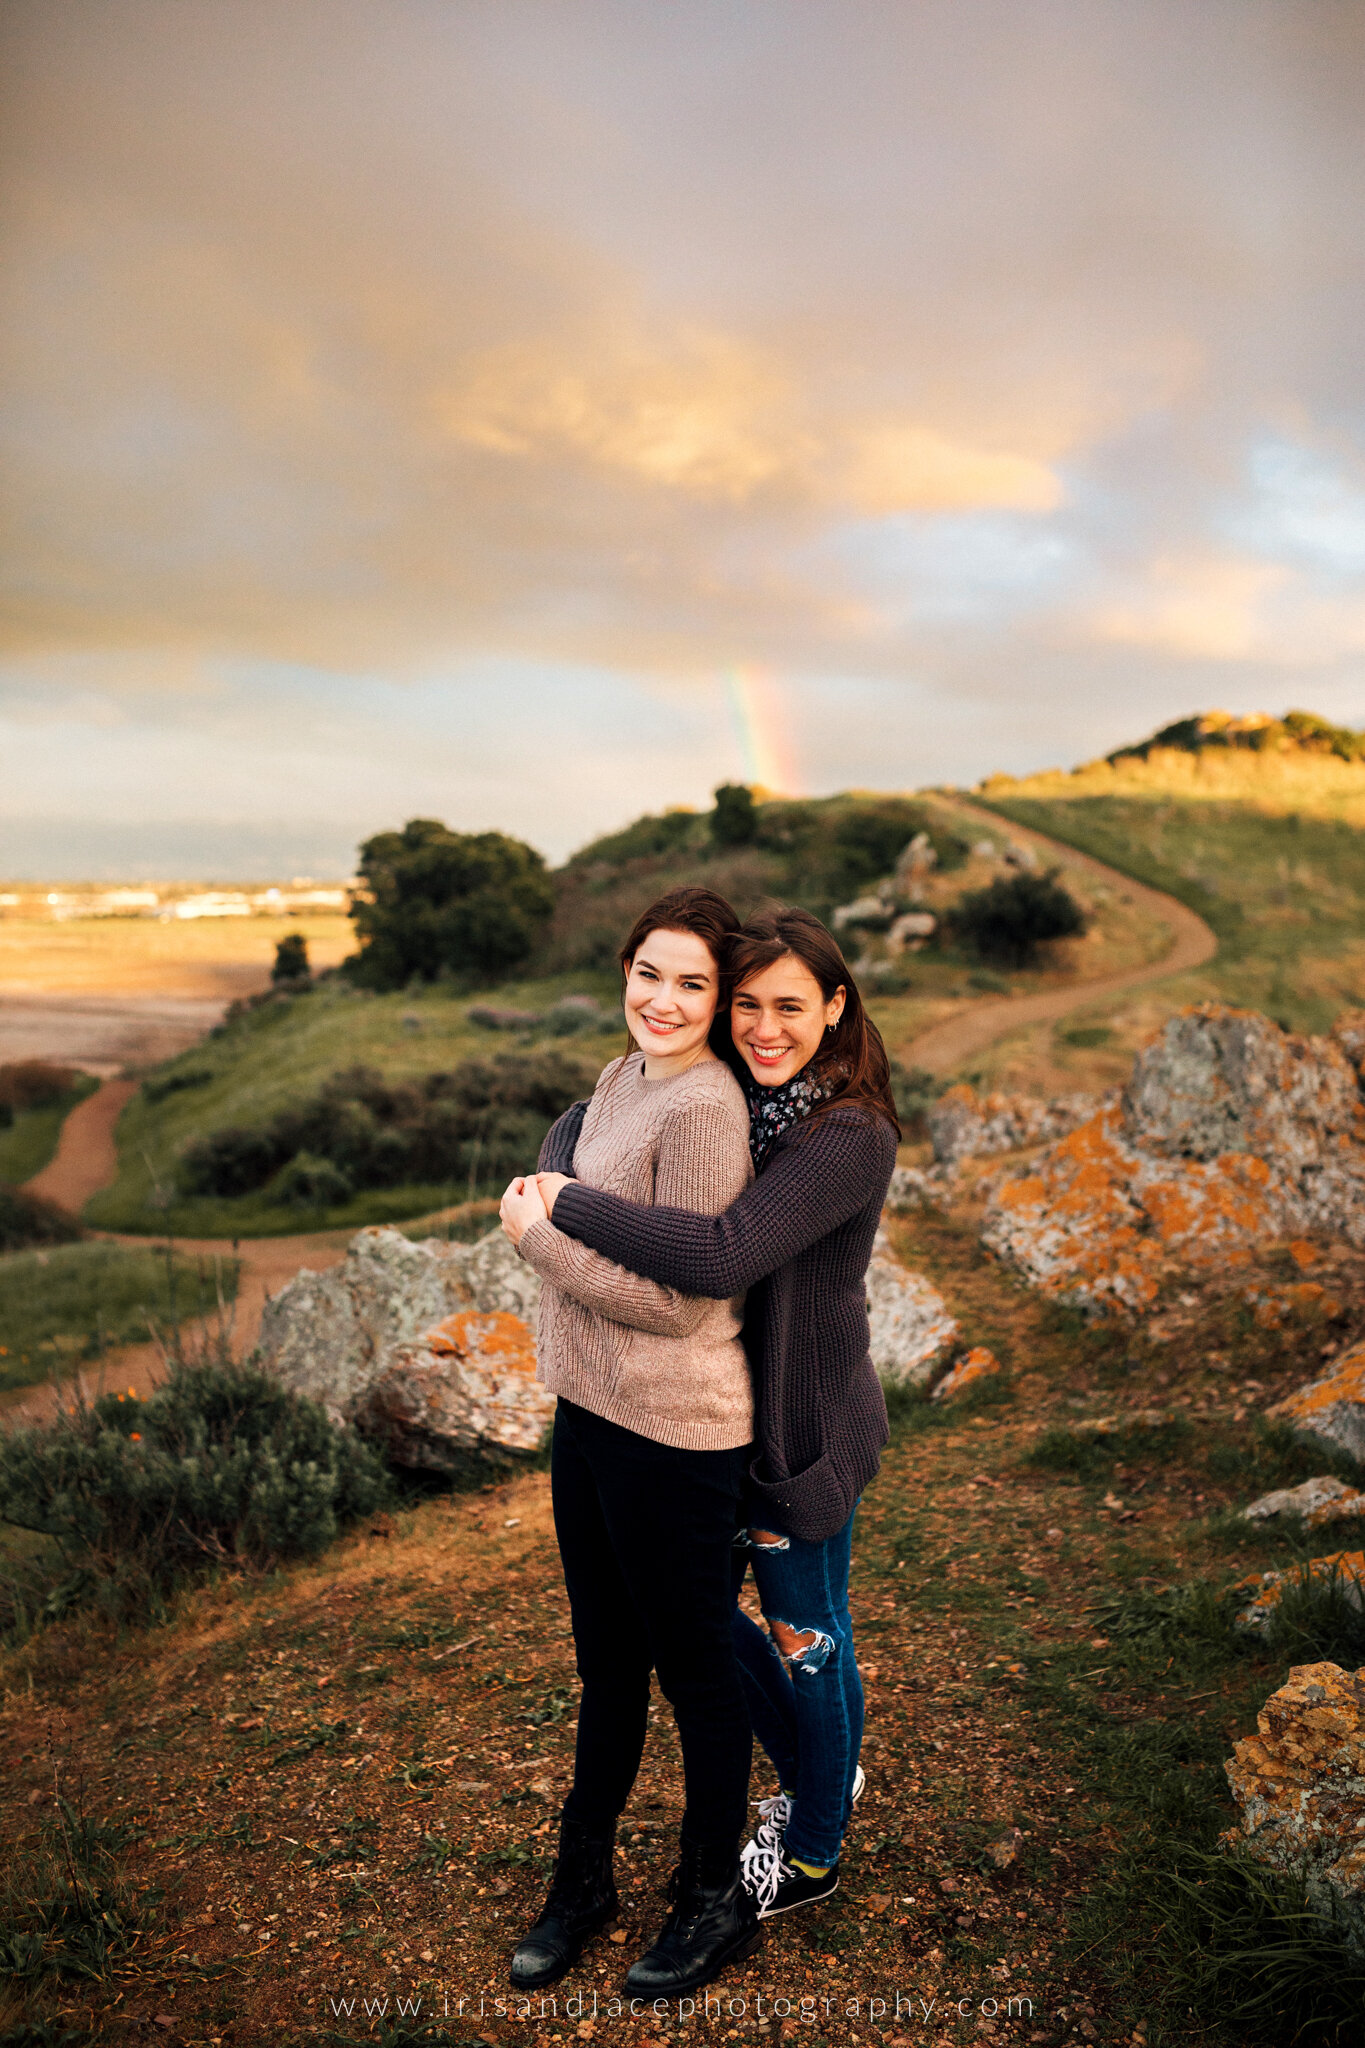 Engagement Photo Ideas for Same Sex Couples  | Bay Area Family and Couples Photographer  |  LGBT Friendly Photographers in SF Bay Area 